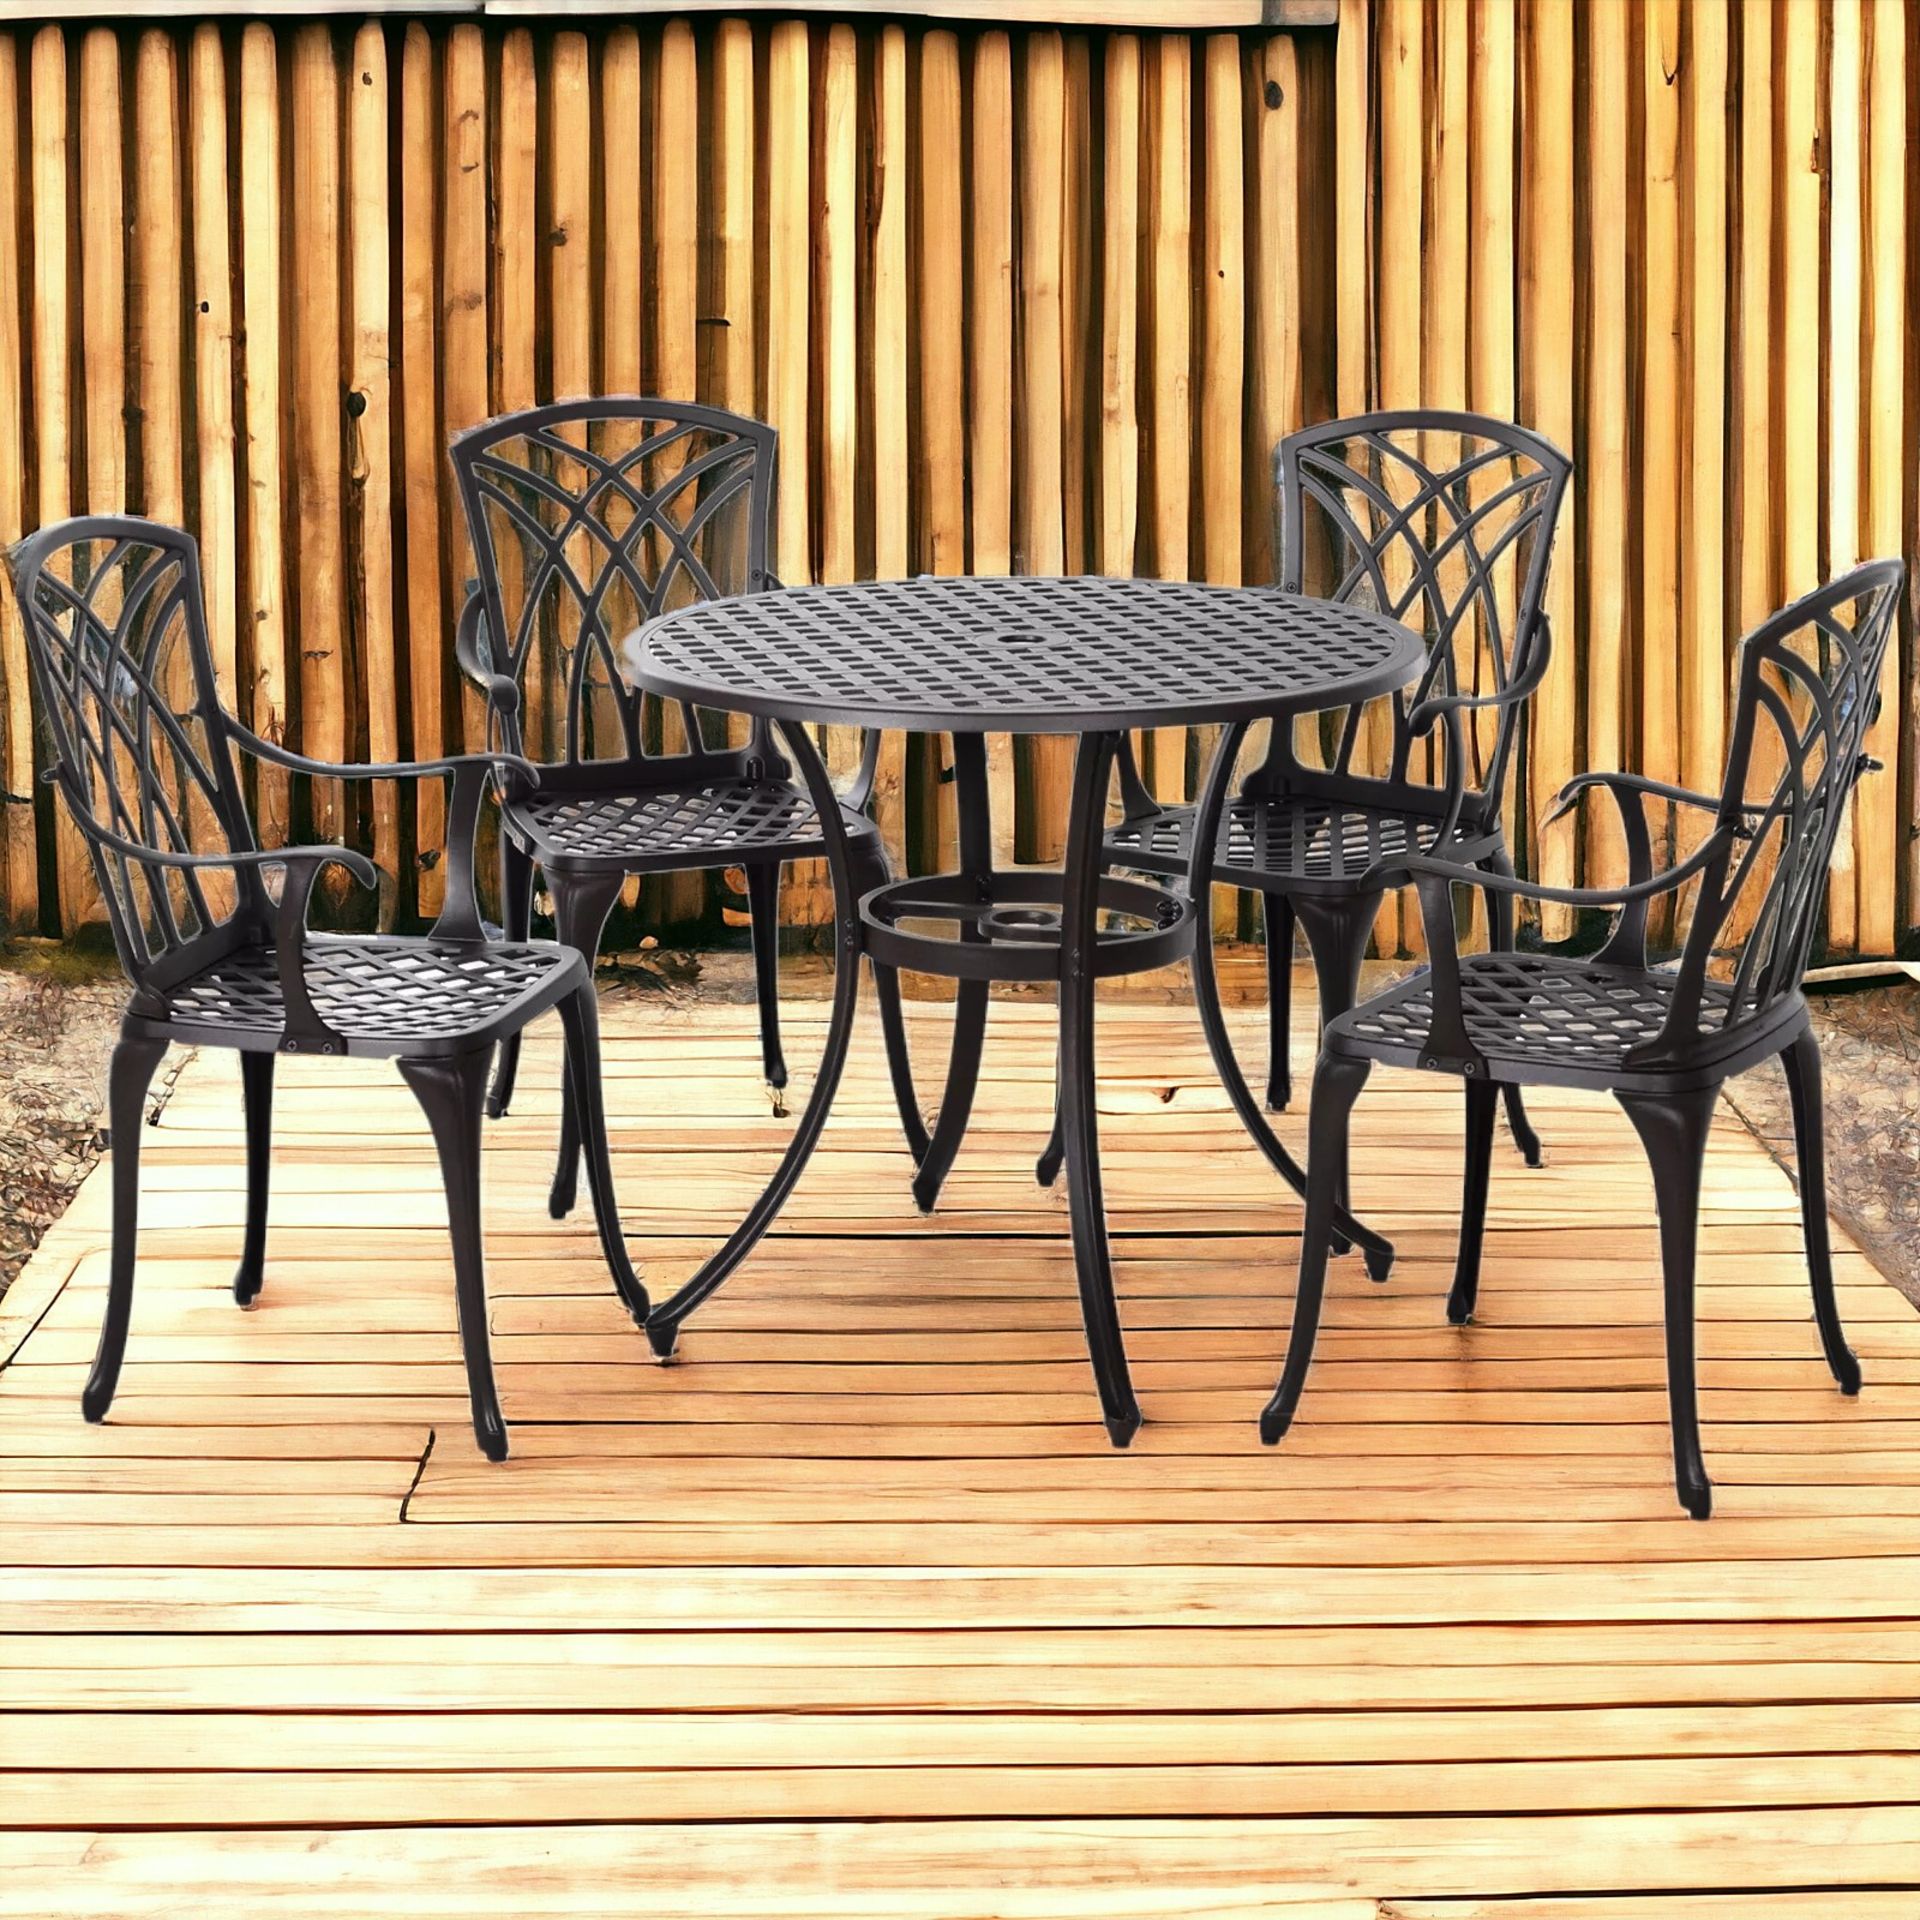 FREE DELIVERY - BRAND NEW 5 PCS COFFEE TABLE CHAIRS OUTDOOR GARDEN FURNITURE SET